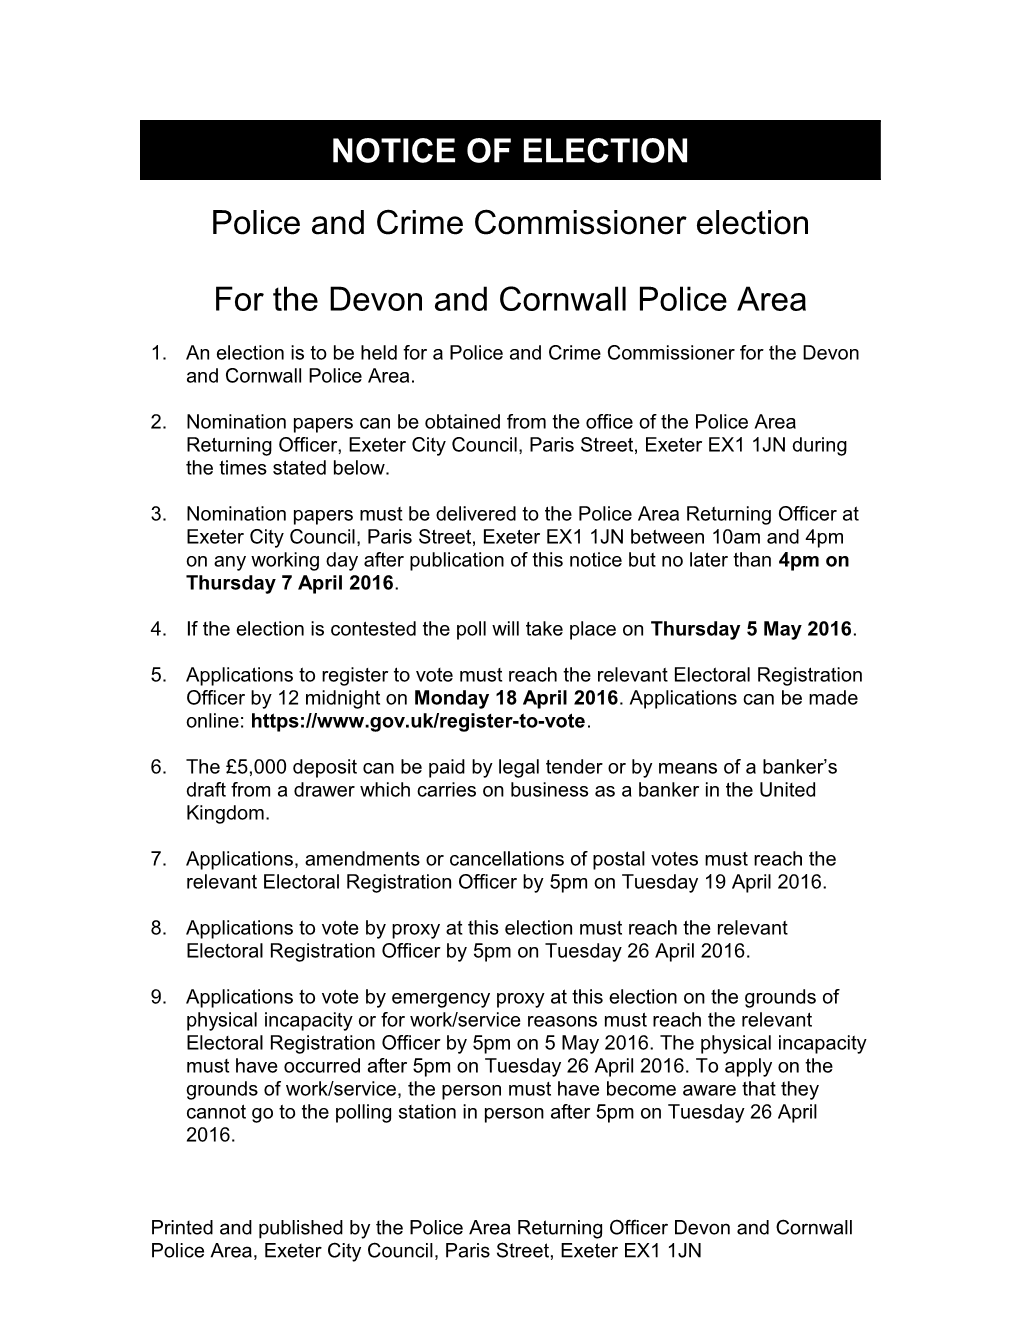 PCC Notice of Election